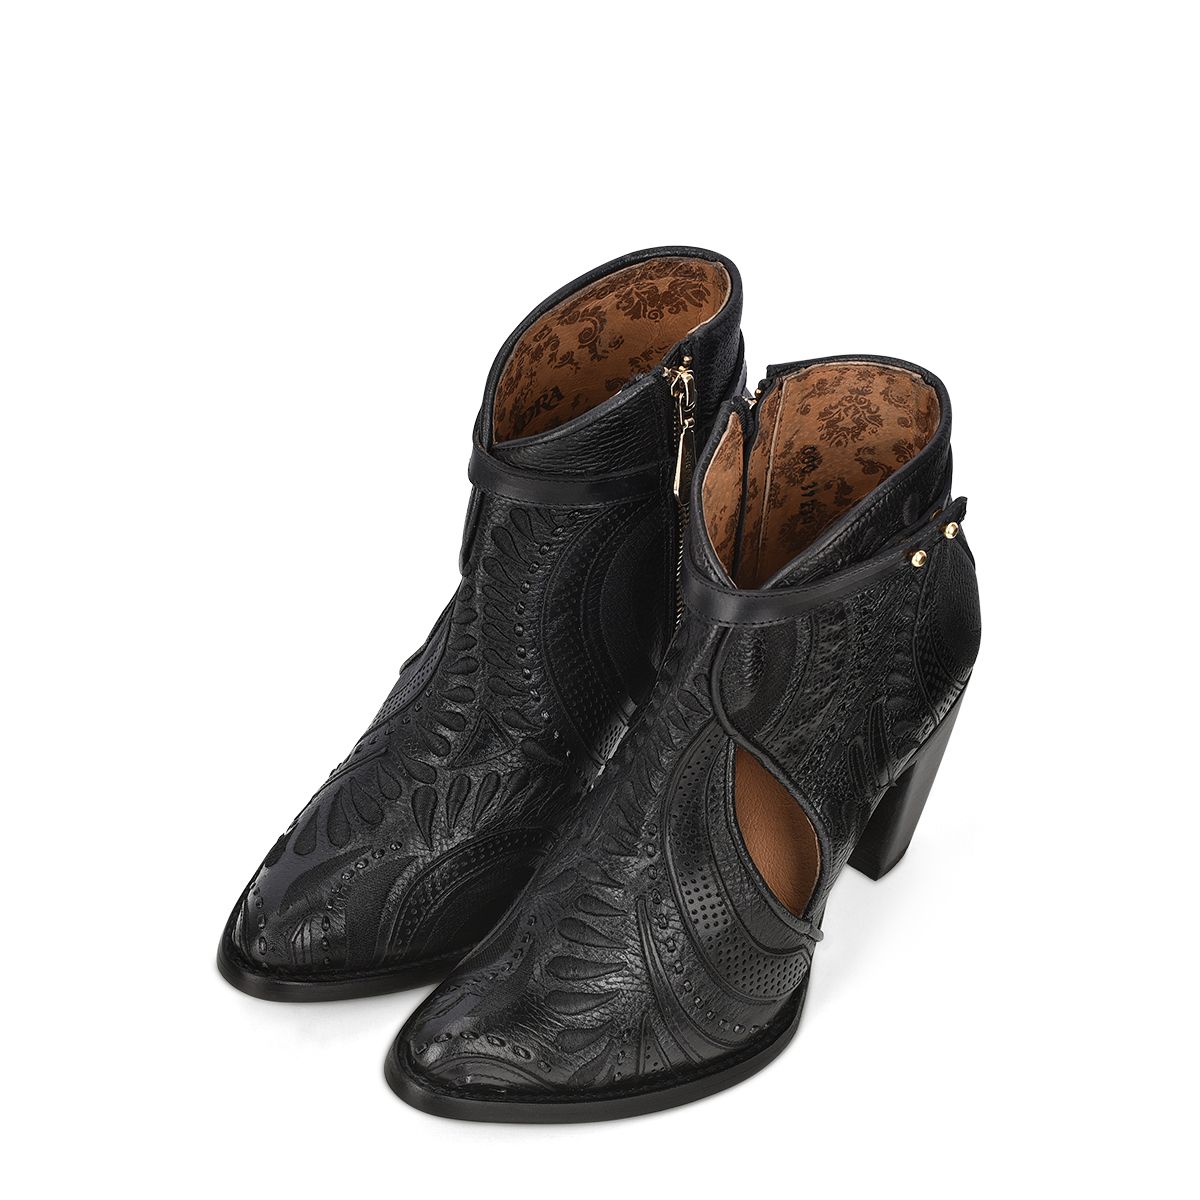 3F95RS - Cuadra black western cowgirl cowhide leather ankle boots for women-Kuet.us